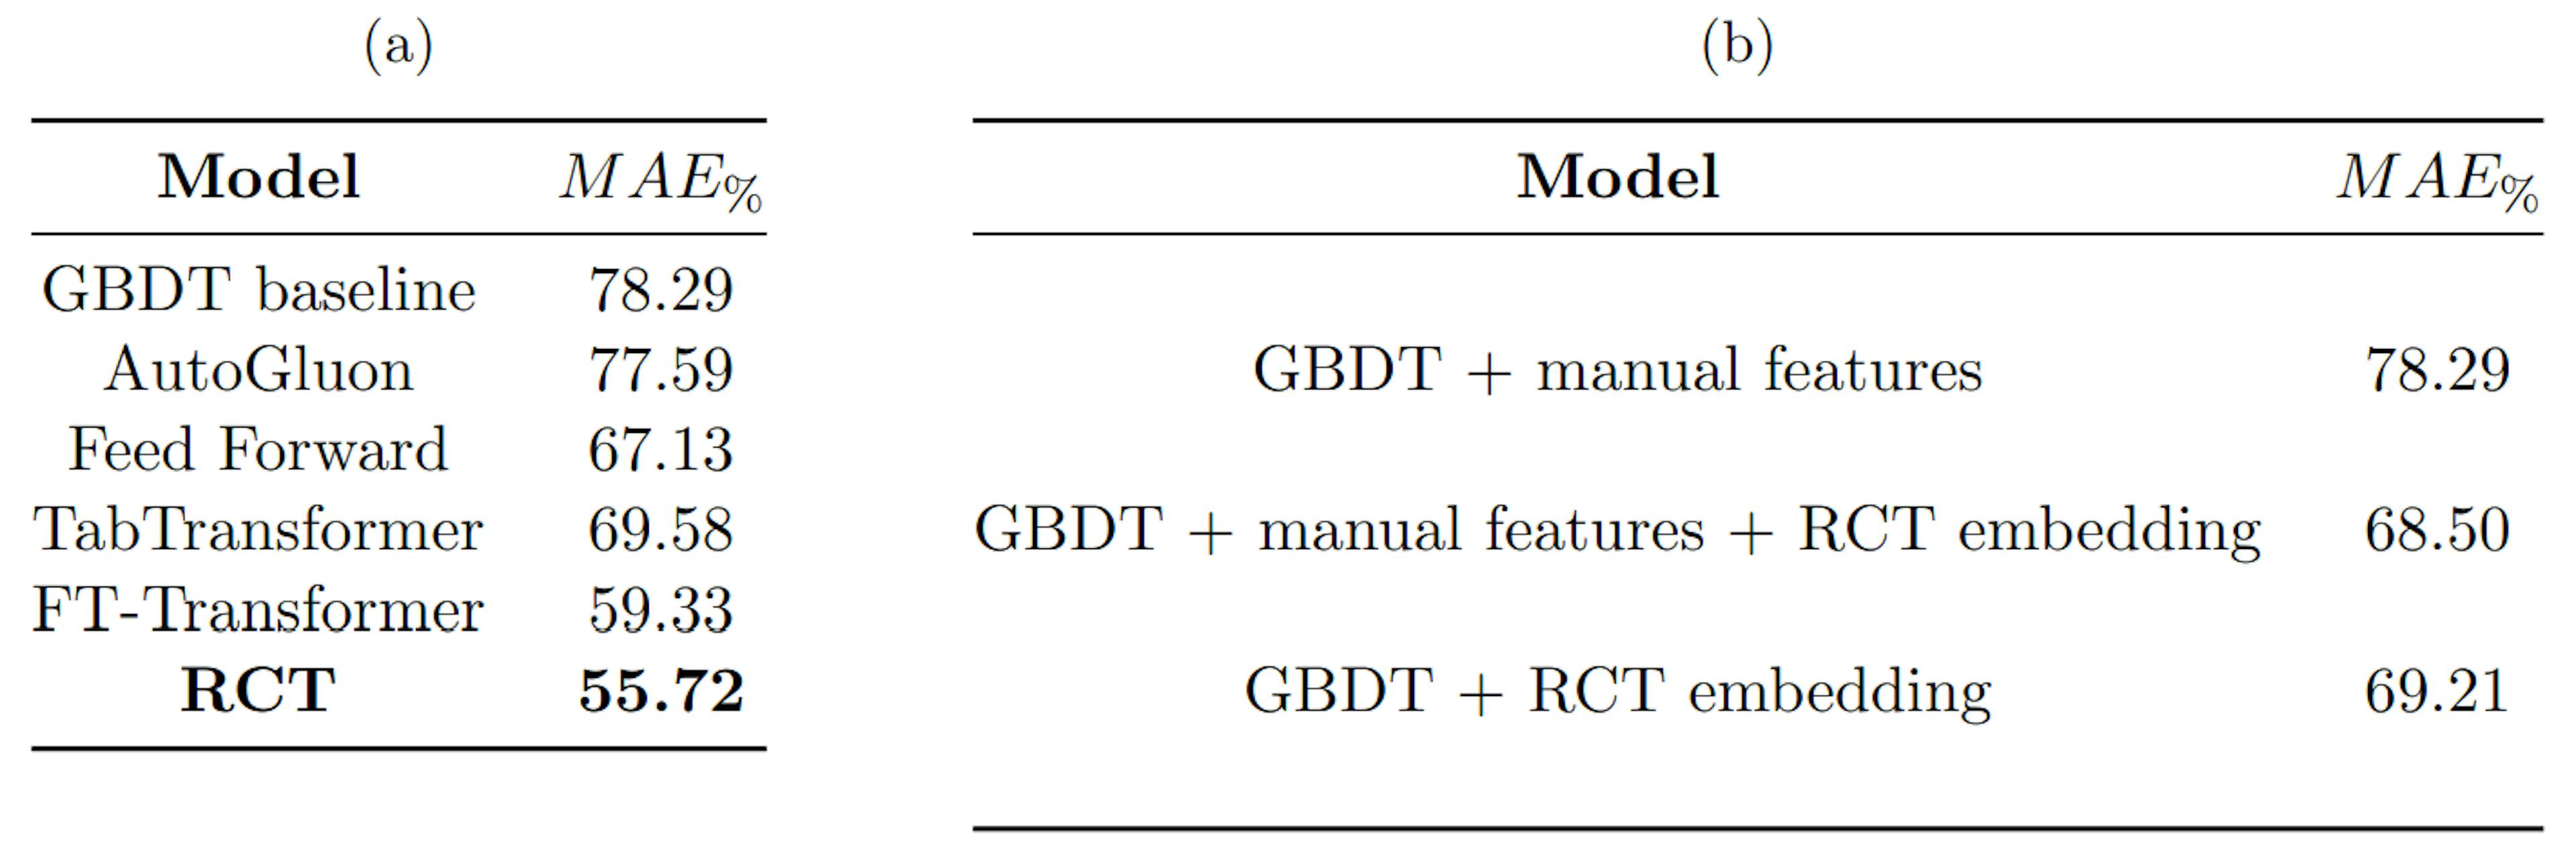 Table 1: (a) compares the performance of the RCT against various benchmarks, (b) compares the performance of GBDT baseline with GBDT trained with RCT embeddings. MAE% is calculated as shown in Equation 4.